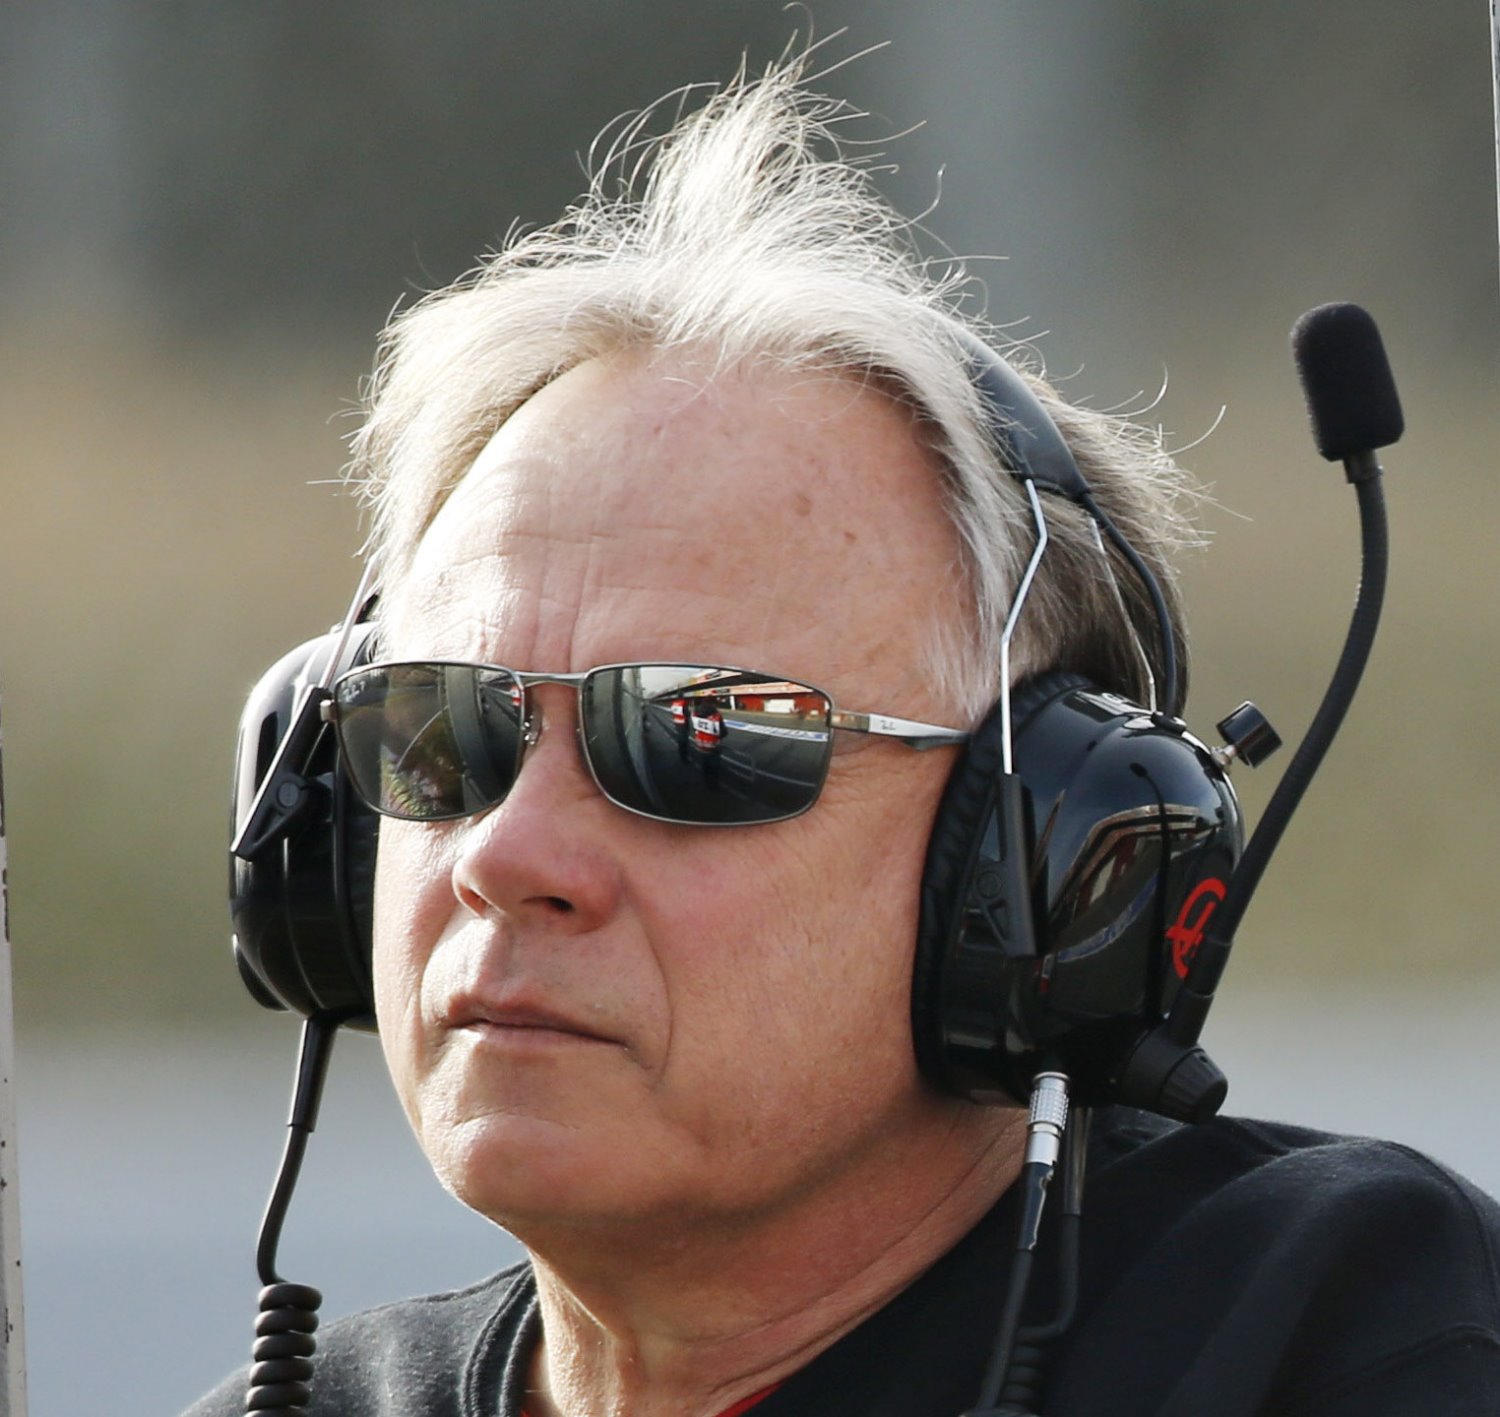 Gene Haas out of his league in F1